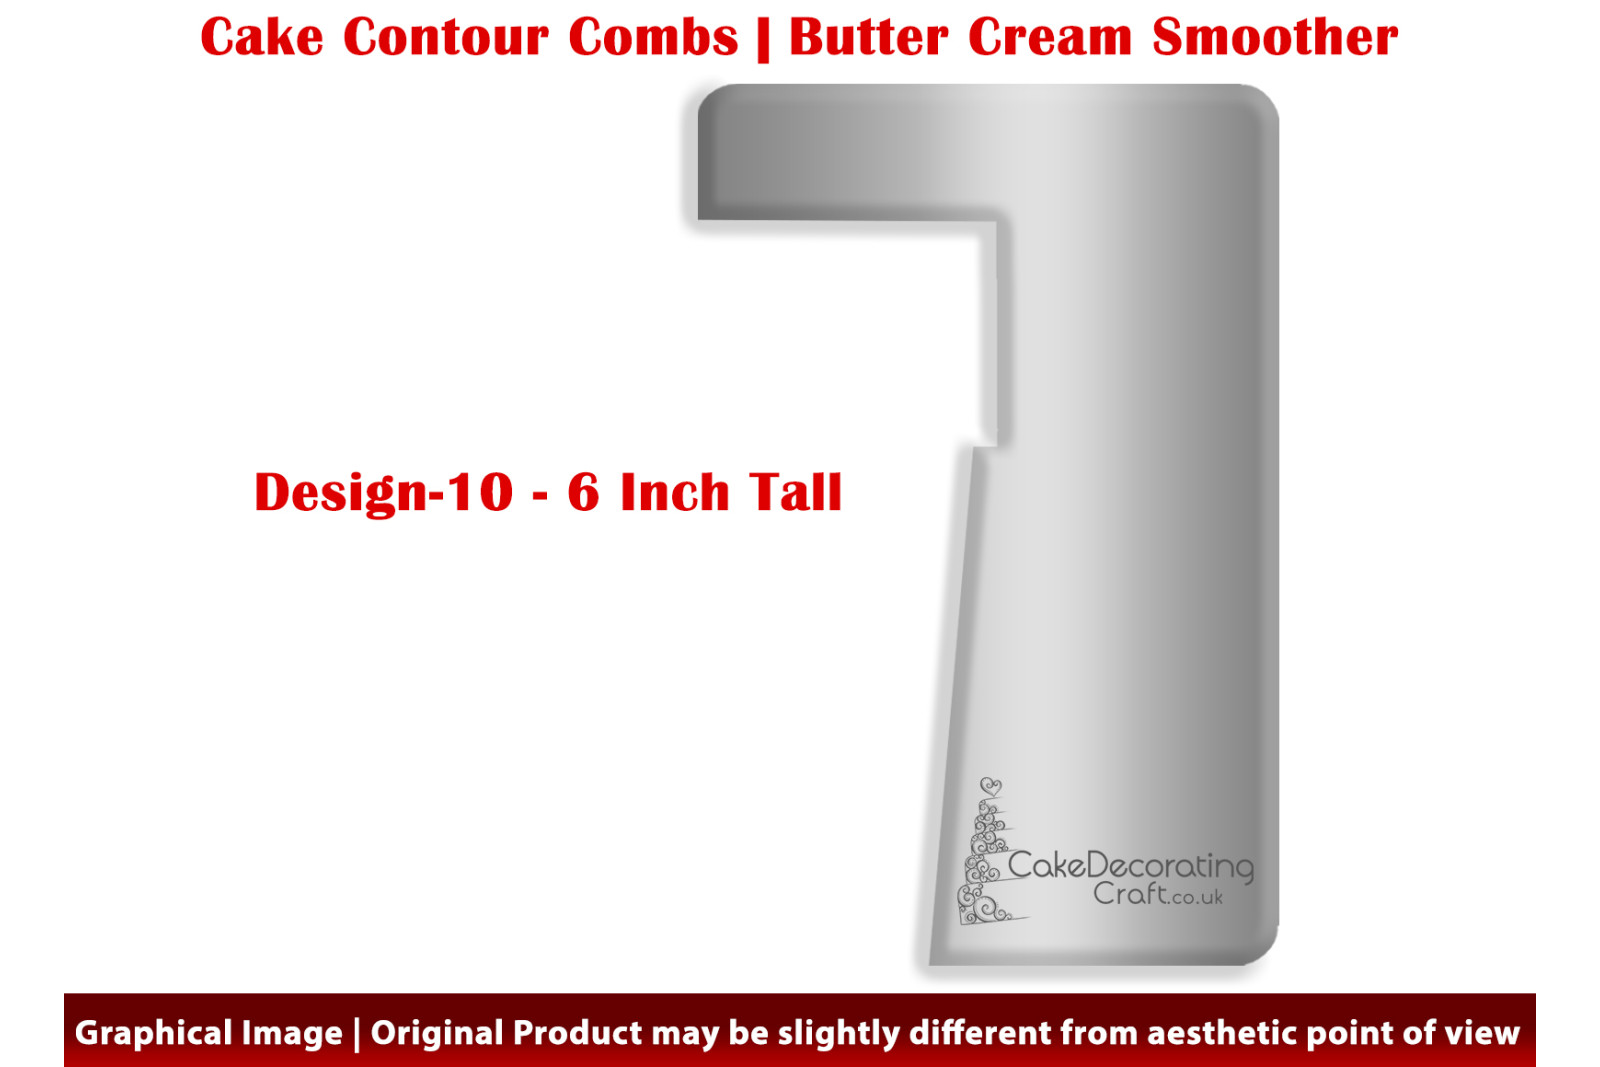 Flower Pot | Design 10 | 6 Inch | Cake Decorating Craft | Cake Contour Combs | Smoothing | Metal Spreader | Butter Cream Smoothing | Genius Tool